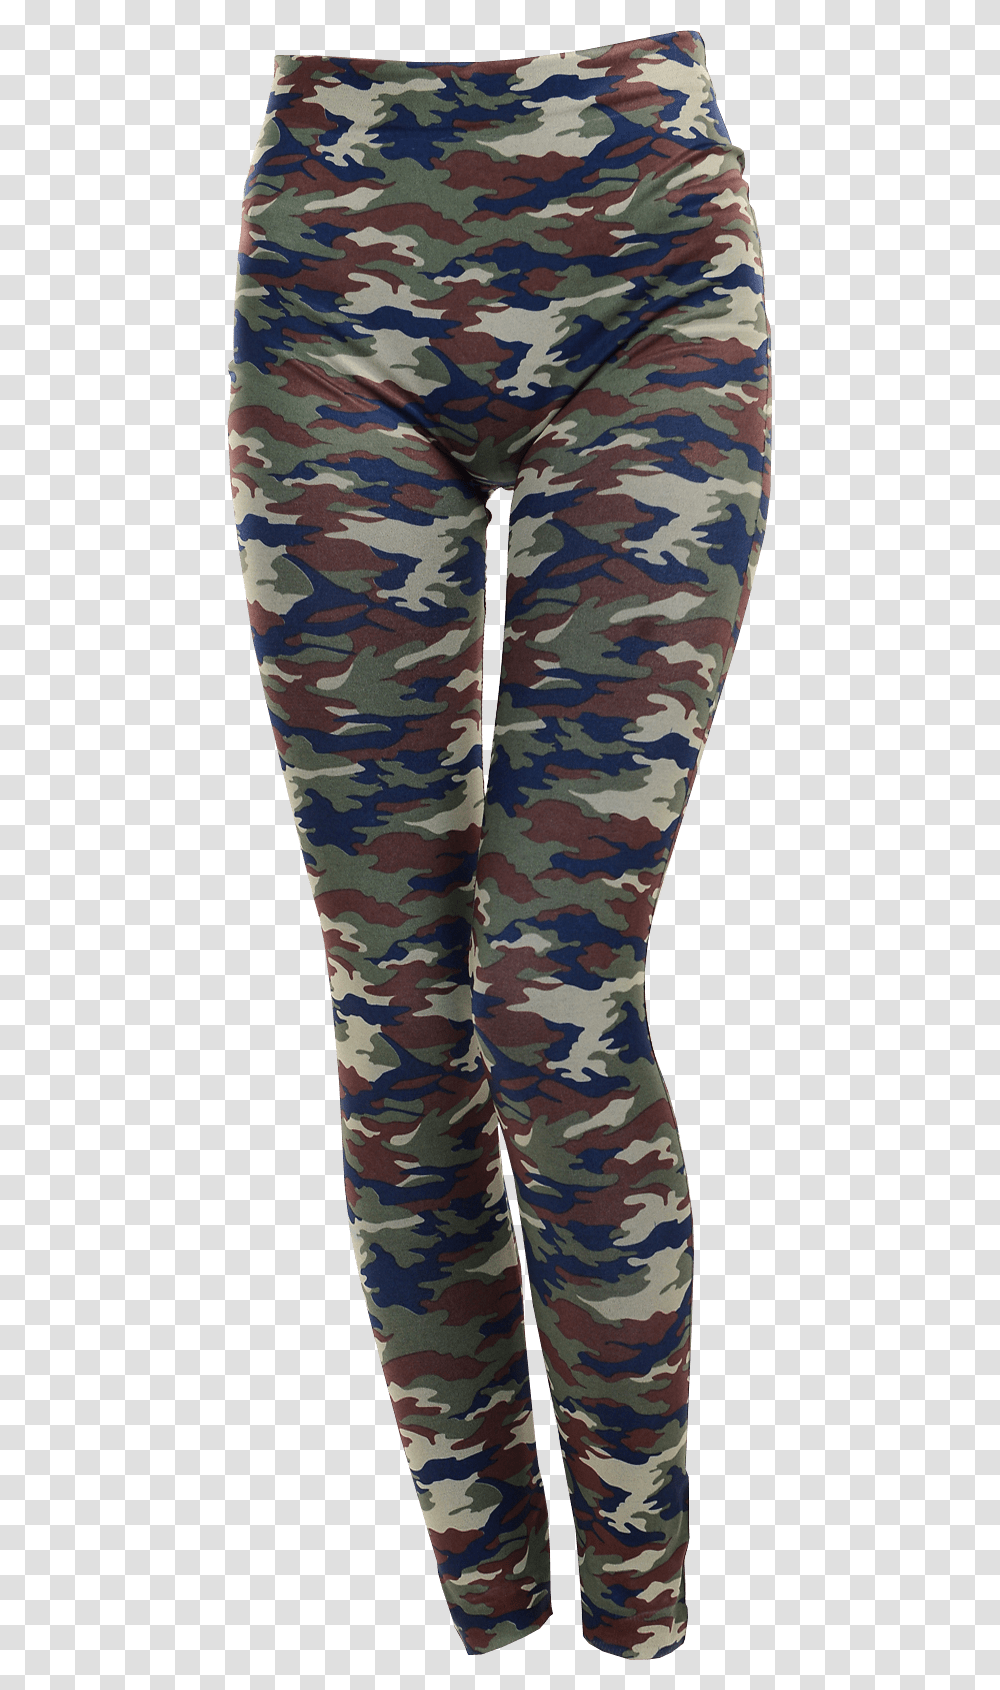 Leggings, Military, Military Uniform, Camouflage Transparent Png